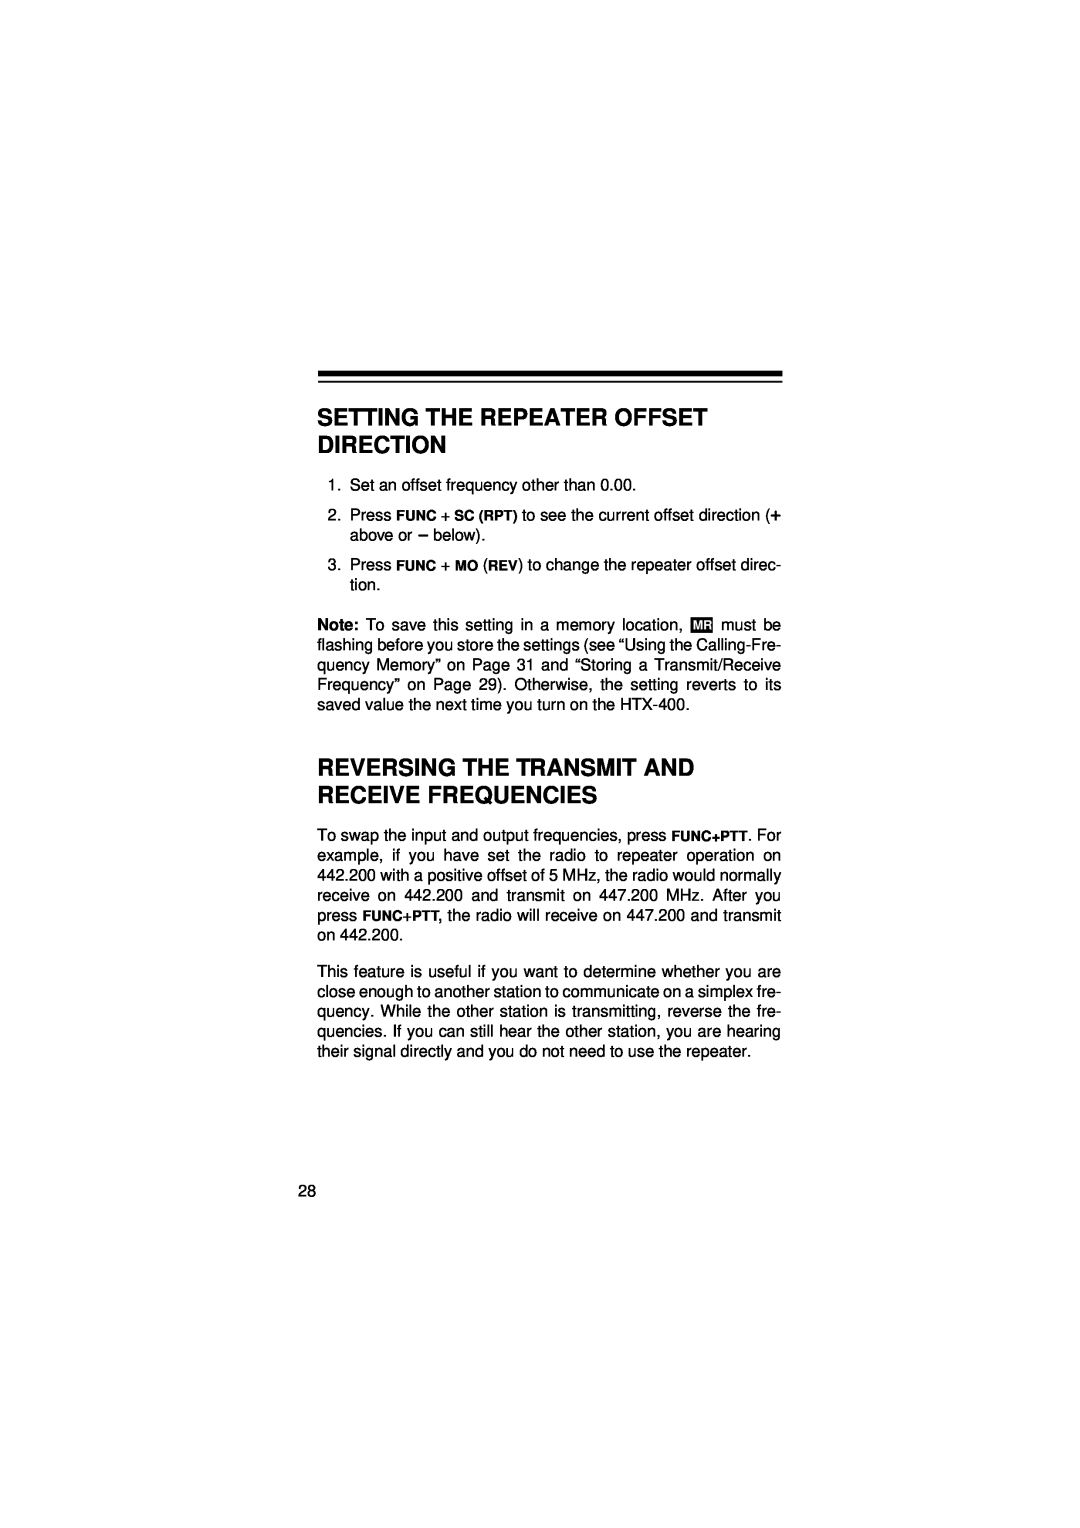 Radio Shack HTX-400 owner manual Setting The Repeater Offset Direction, Reversing The Transmit And Receive Frequencies 